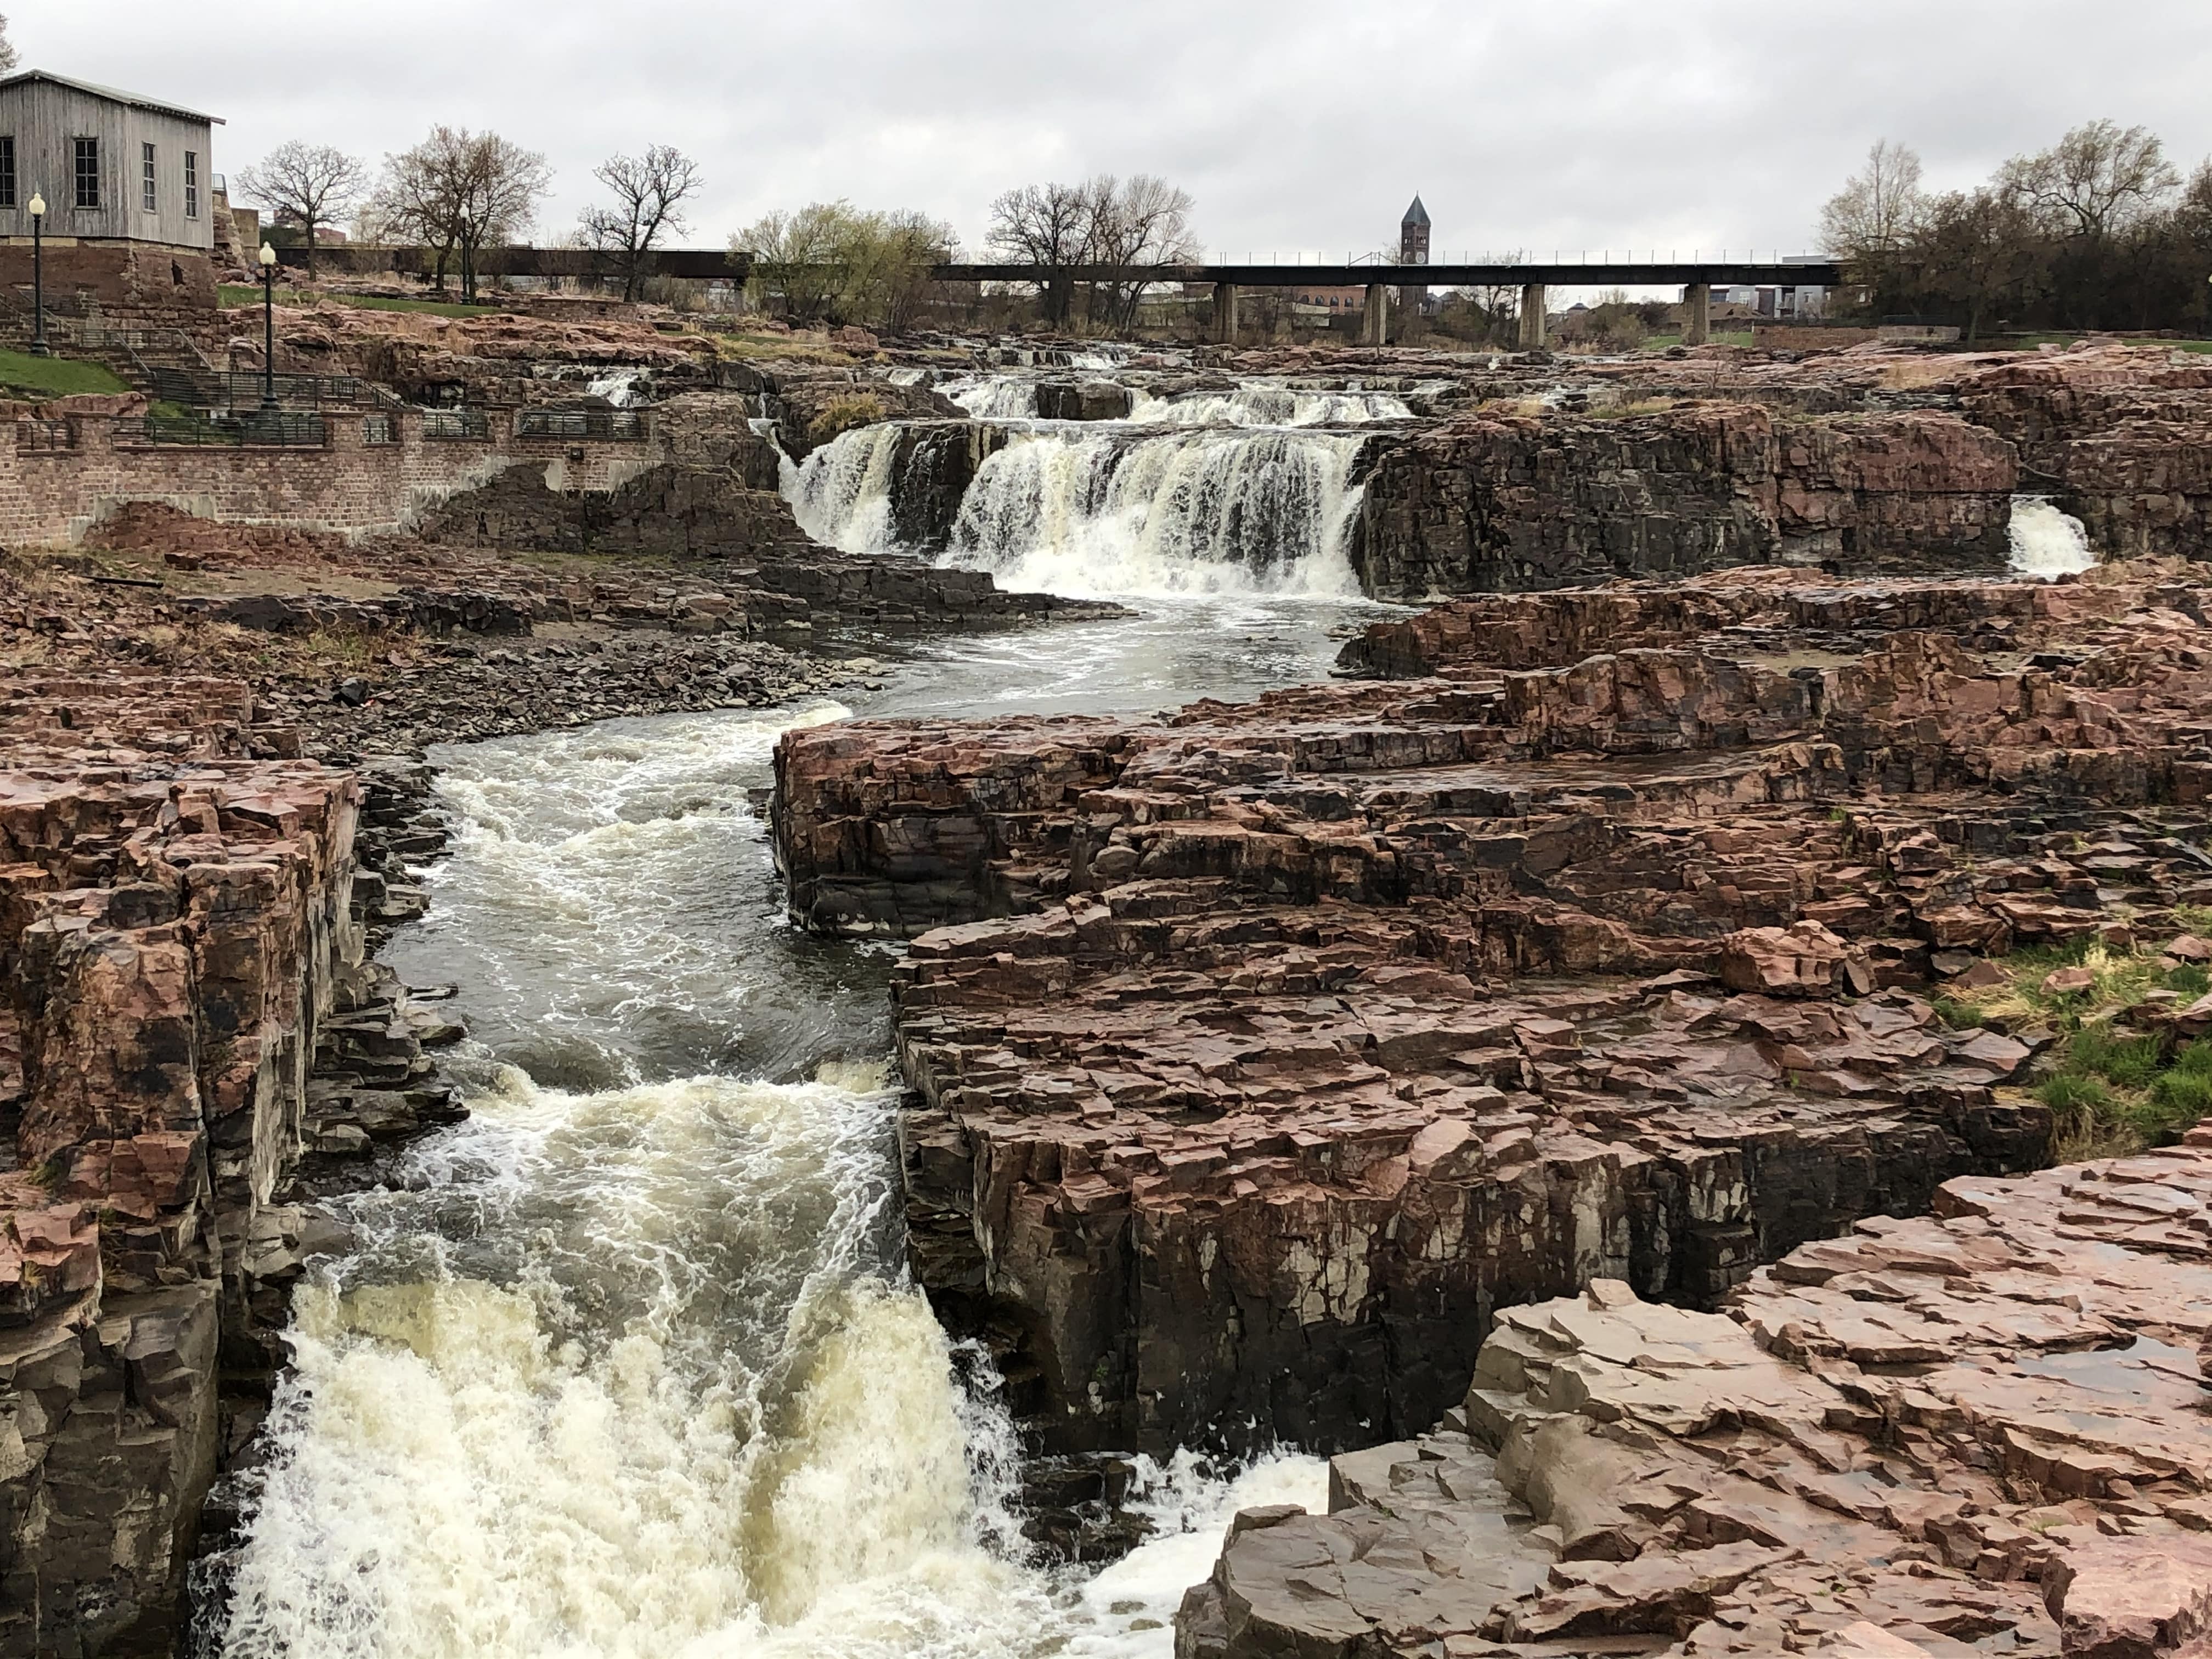 Bridge view of the lower Sioux Falls